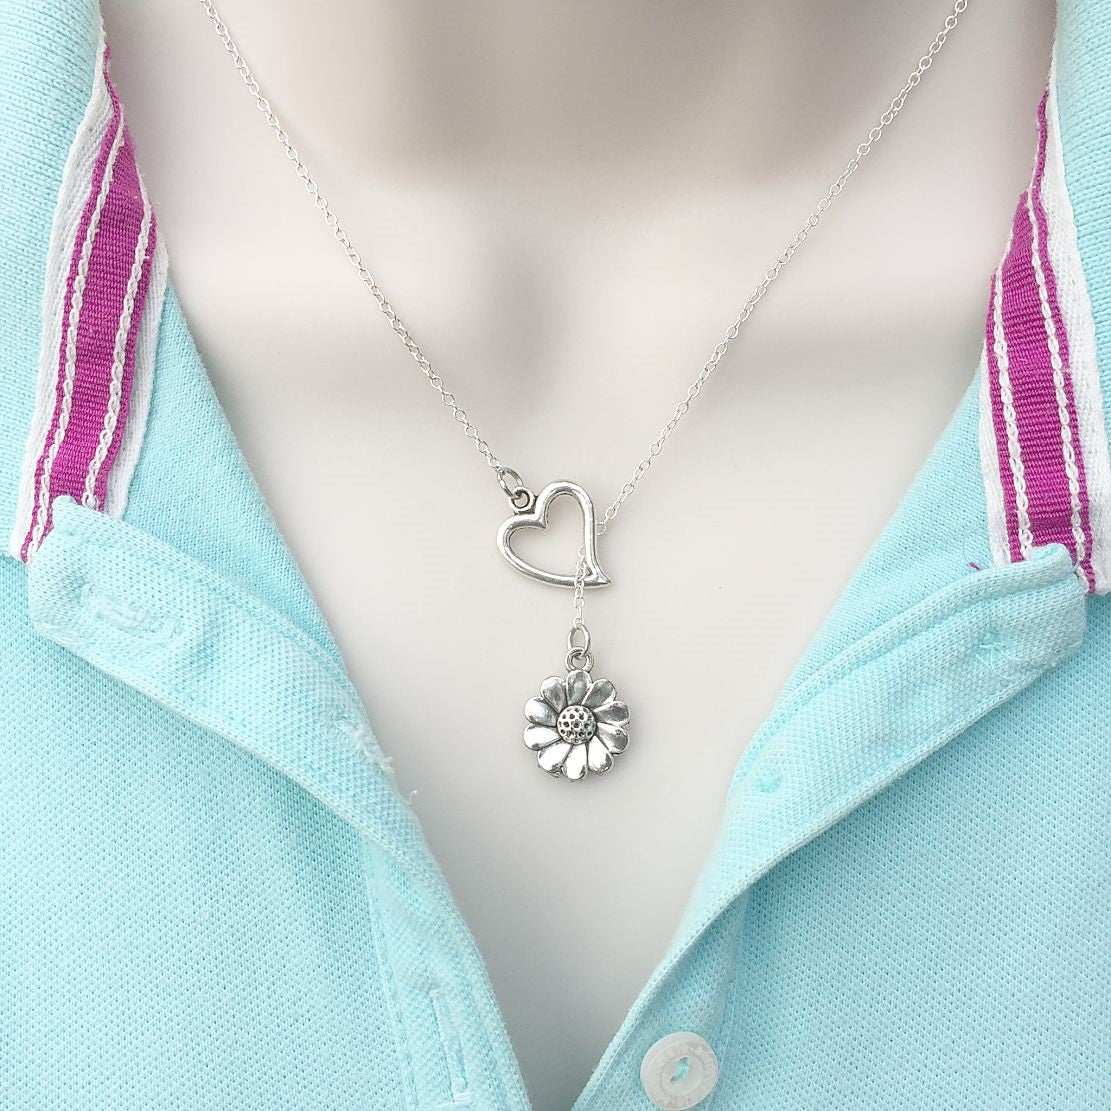 I Love Daisy Sunflower Silver Lariat Y Necklace.